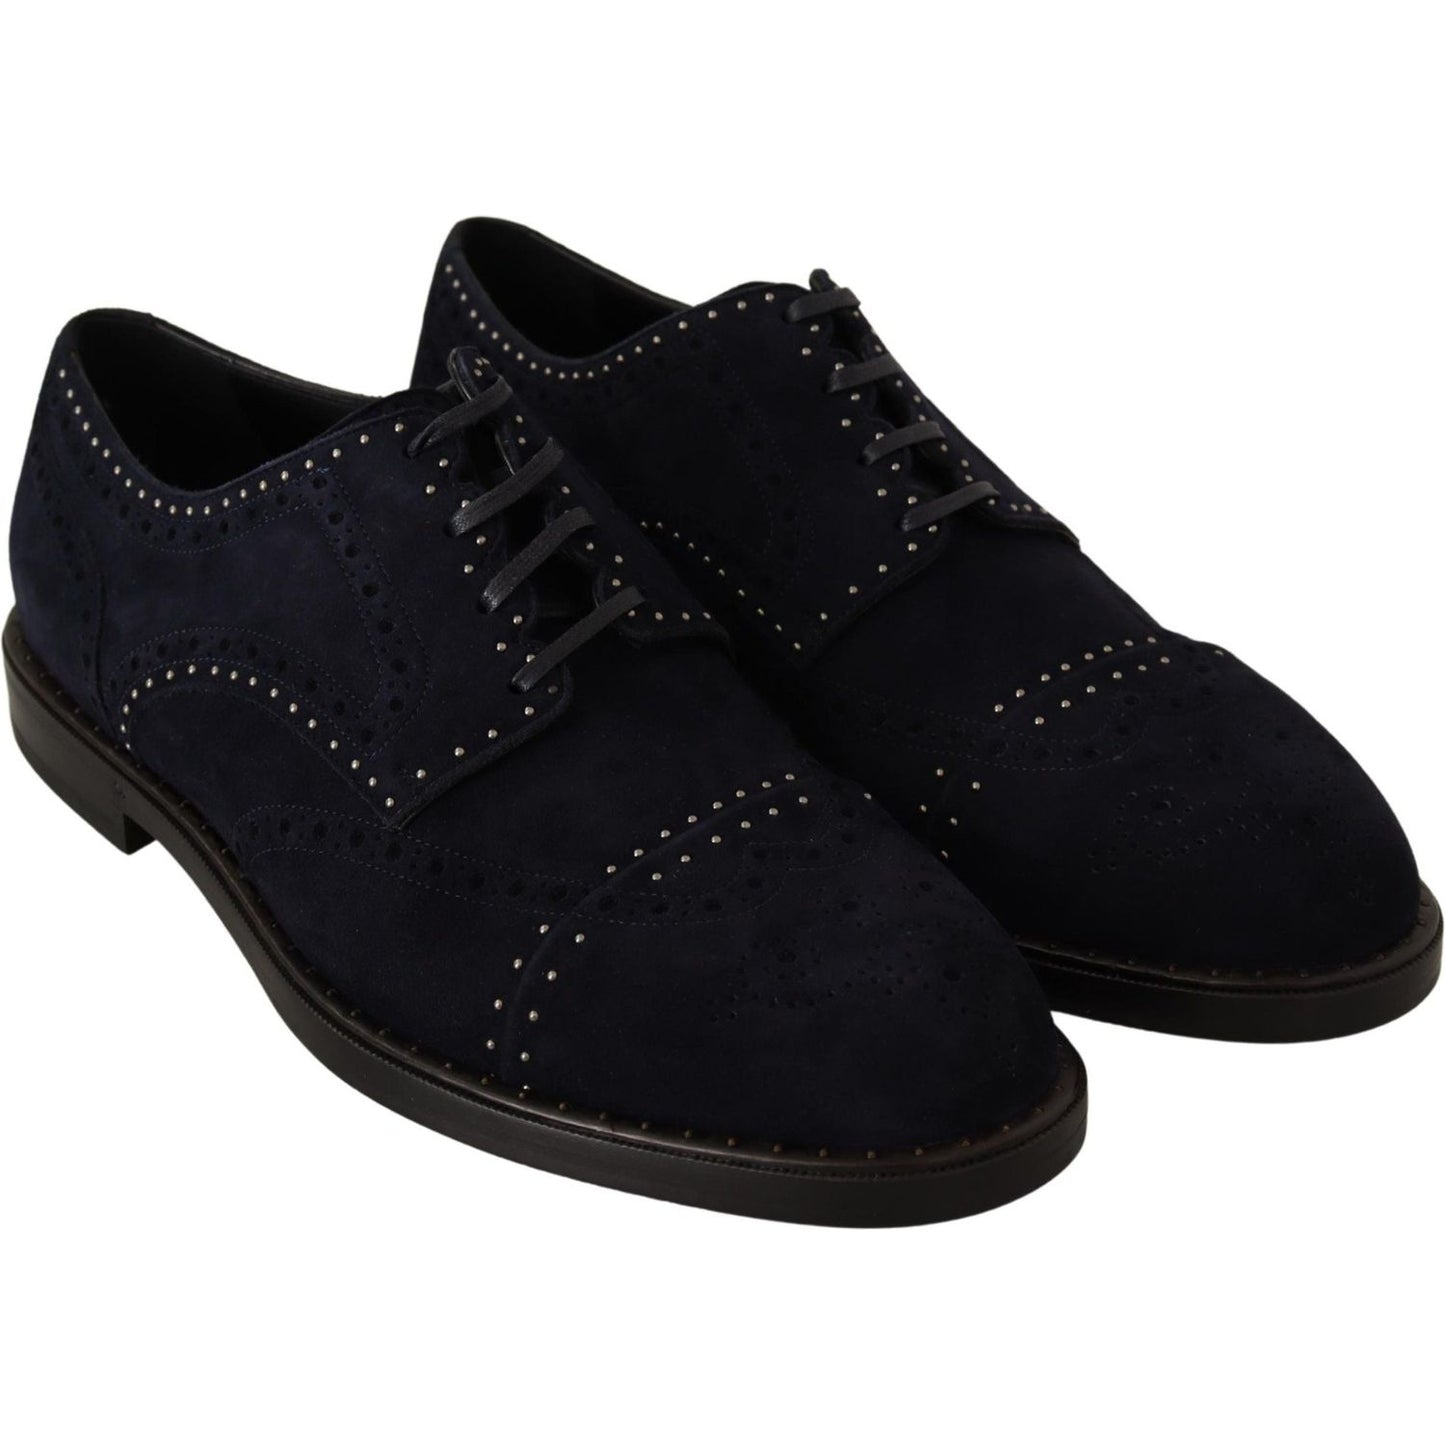 Dolce & Gabbana Elegant Suede Derby Shoes with Silver Studs blue-suede-leather-derby-studded-shoes Dress Shoes IMG_8960-087631b2-2cb.jpg